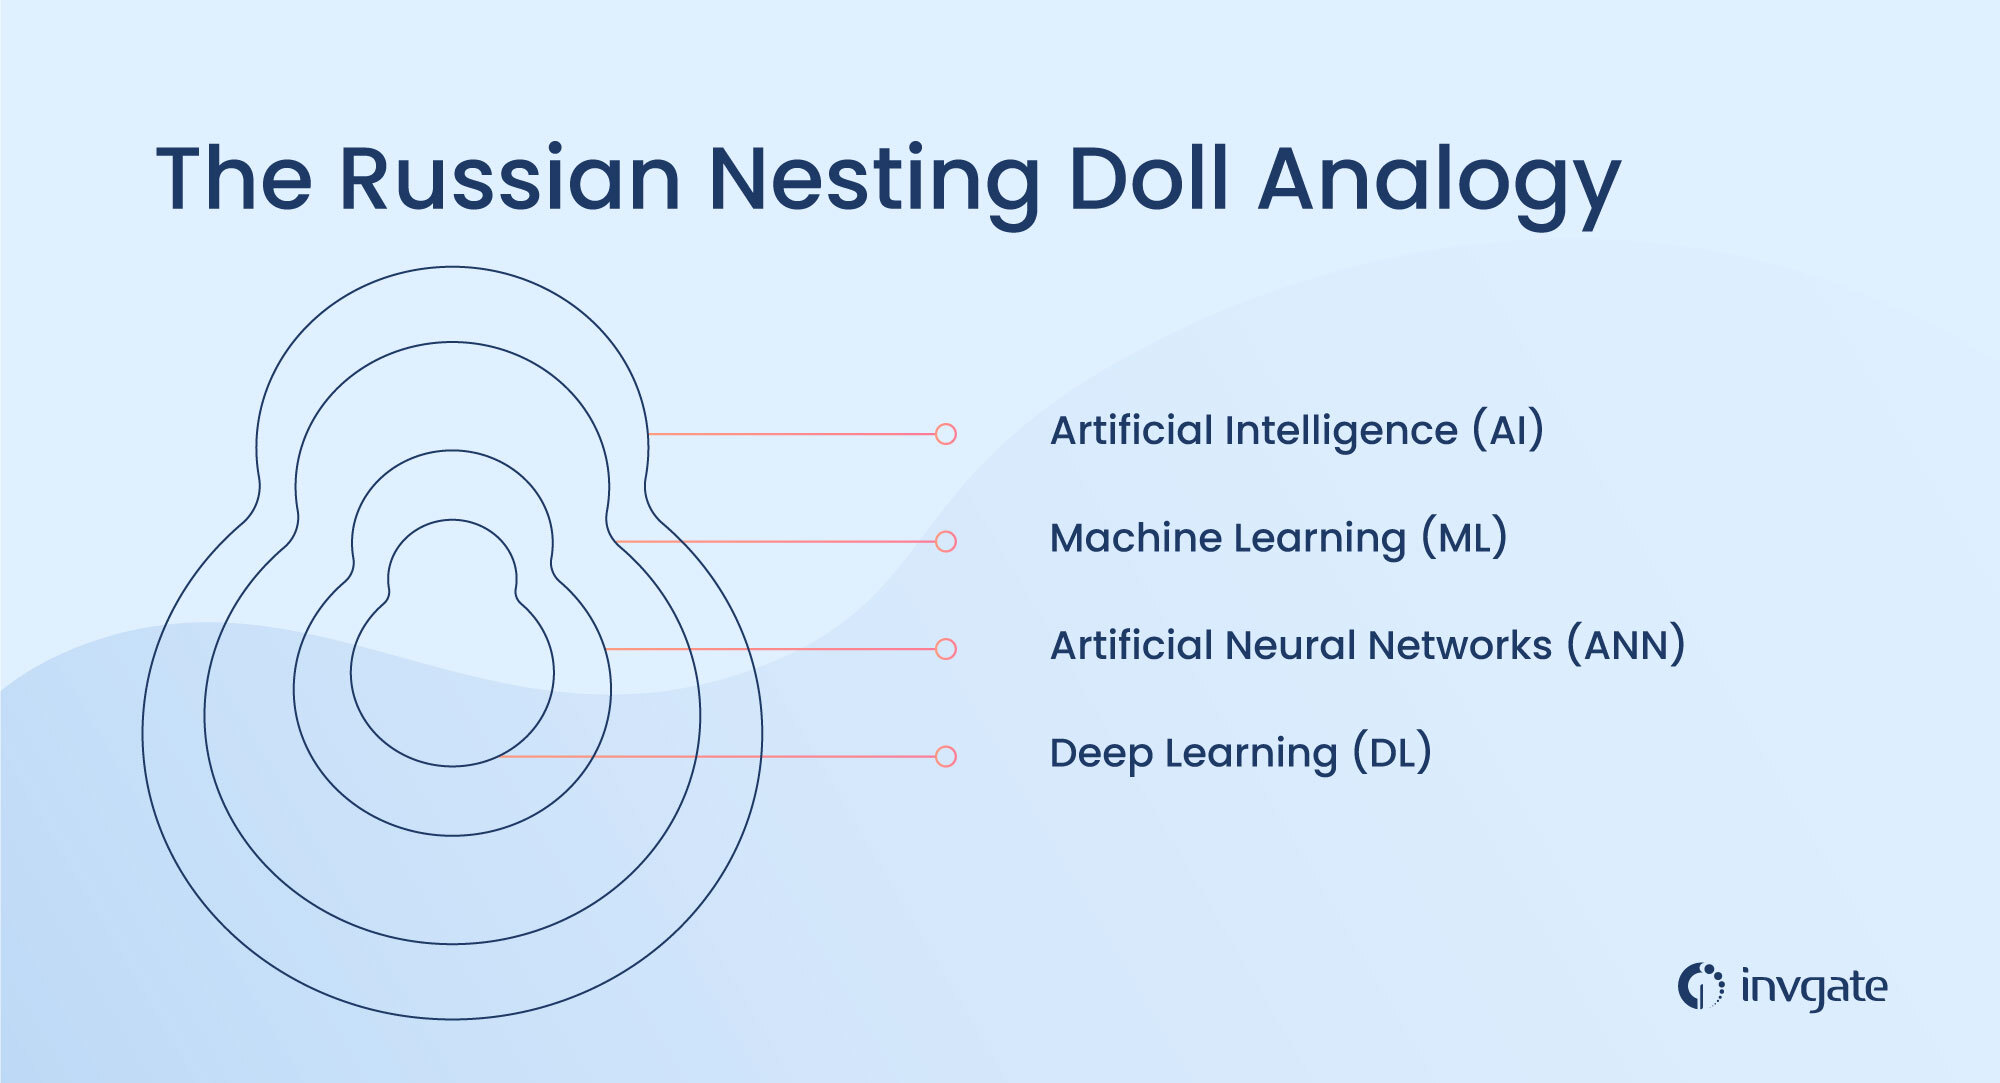 The best way to understand how artificial intelligence, machine learning, neural networks, and deep learning all relate is to use the (already quite famous) Russian nesting doll analogy